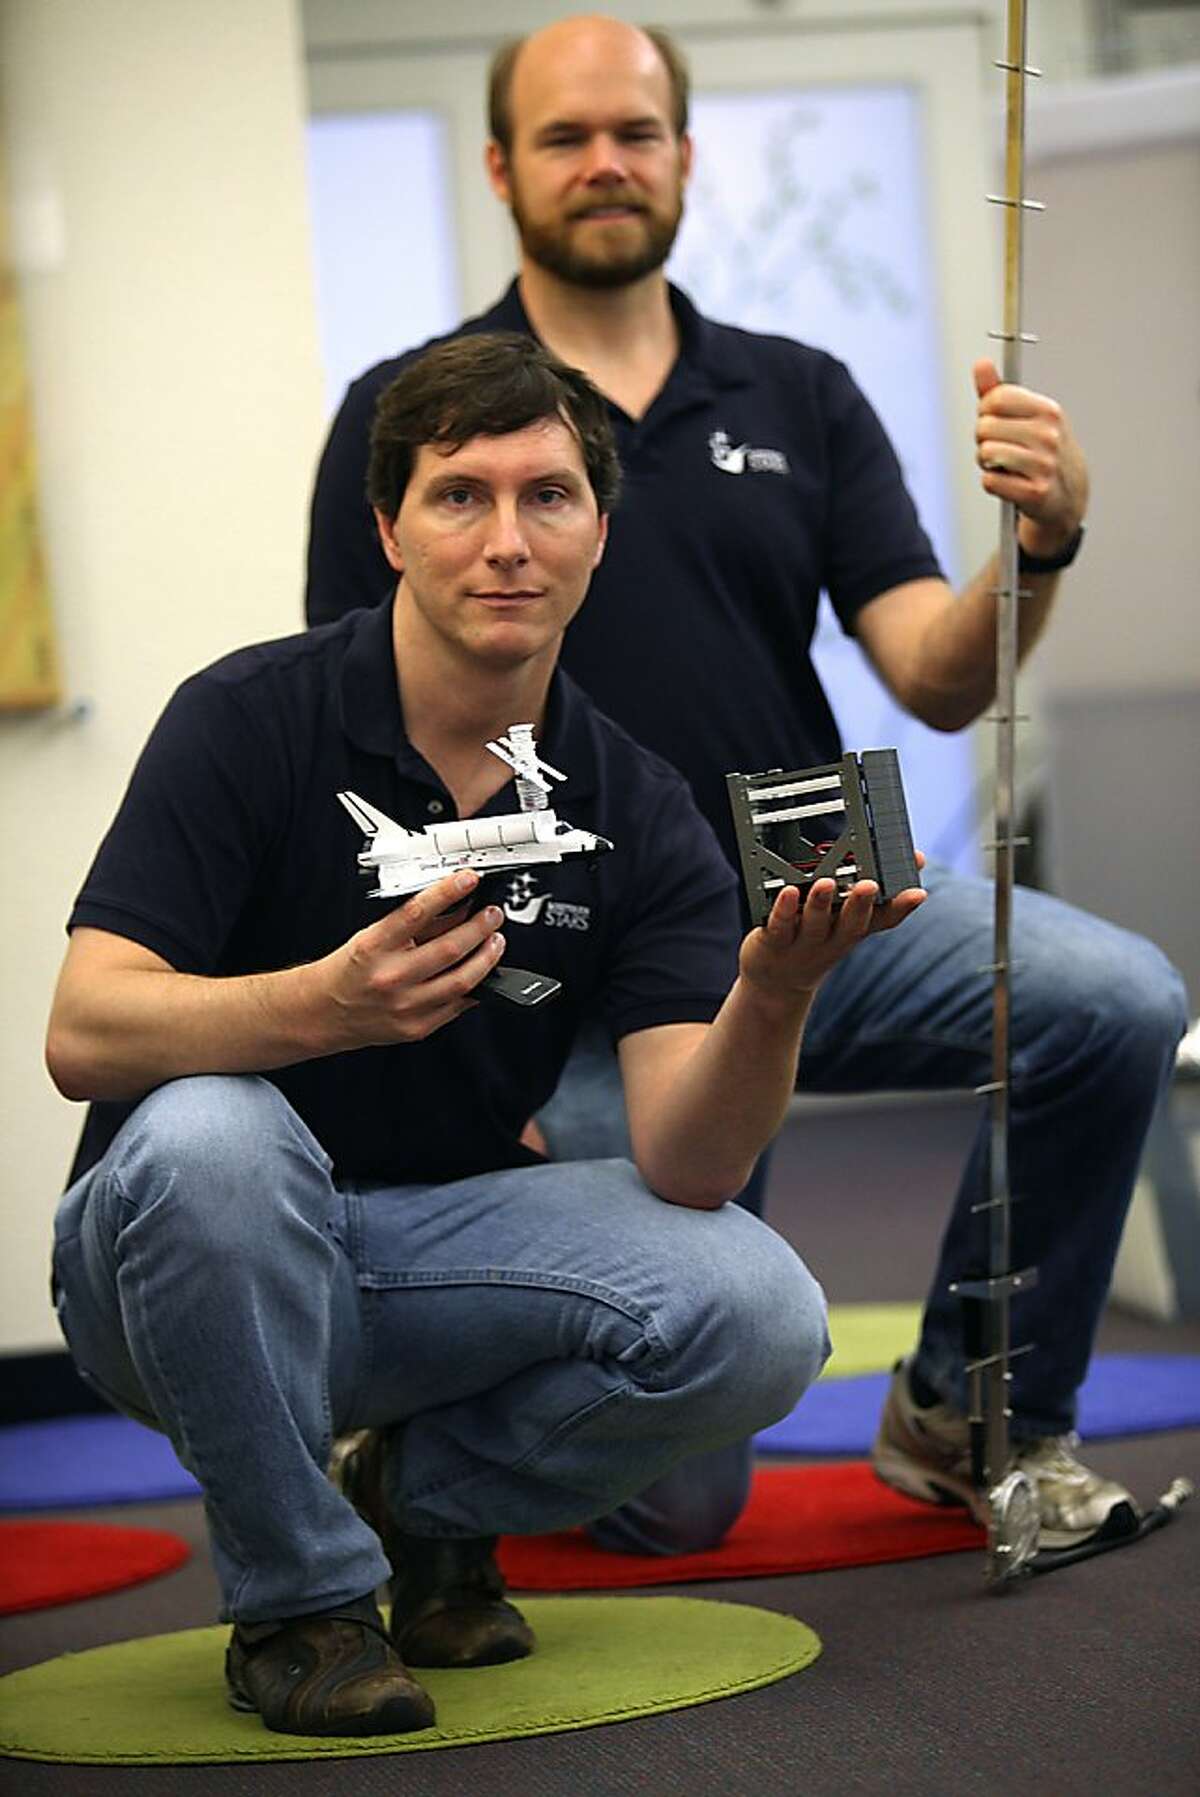 Founder Tim DeBenedictis (front) and engineer Chris Phoenix (behind) with a Yagi antenna, show the SkyCube (middle) in San Francisco, Calif., on Tuesday, August 21, 2012. Tim has been writing astronomy software since his high school days, and part of his inspiration was seeing the last shuttle flight at Fort Canaveral.